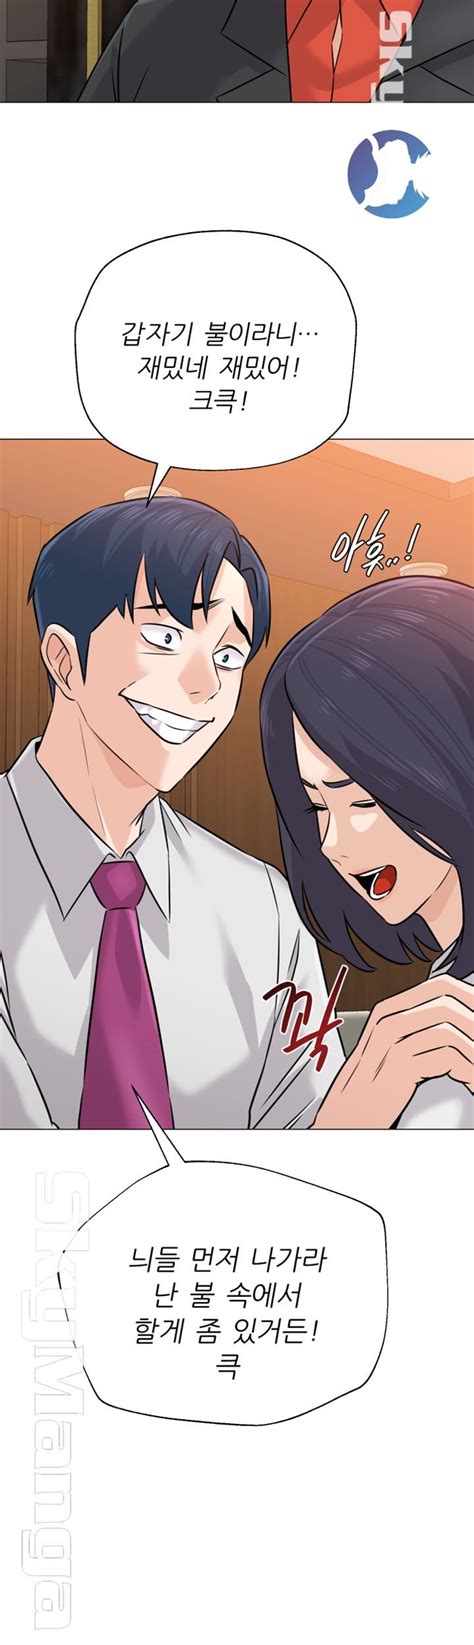 You're read My Madam was my Teacher Manhwa online at Manga18.ME. My Madam was my Teacher also known as: La señora de la casa fue mi profesora / The lady of the house was my teacher / My Wife is a Teacher / 사모님 은 선생님. This is the Ongoing Manhwa was released on 2023. The story was written by SaiSai and illustrations by Mana.. 